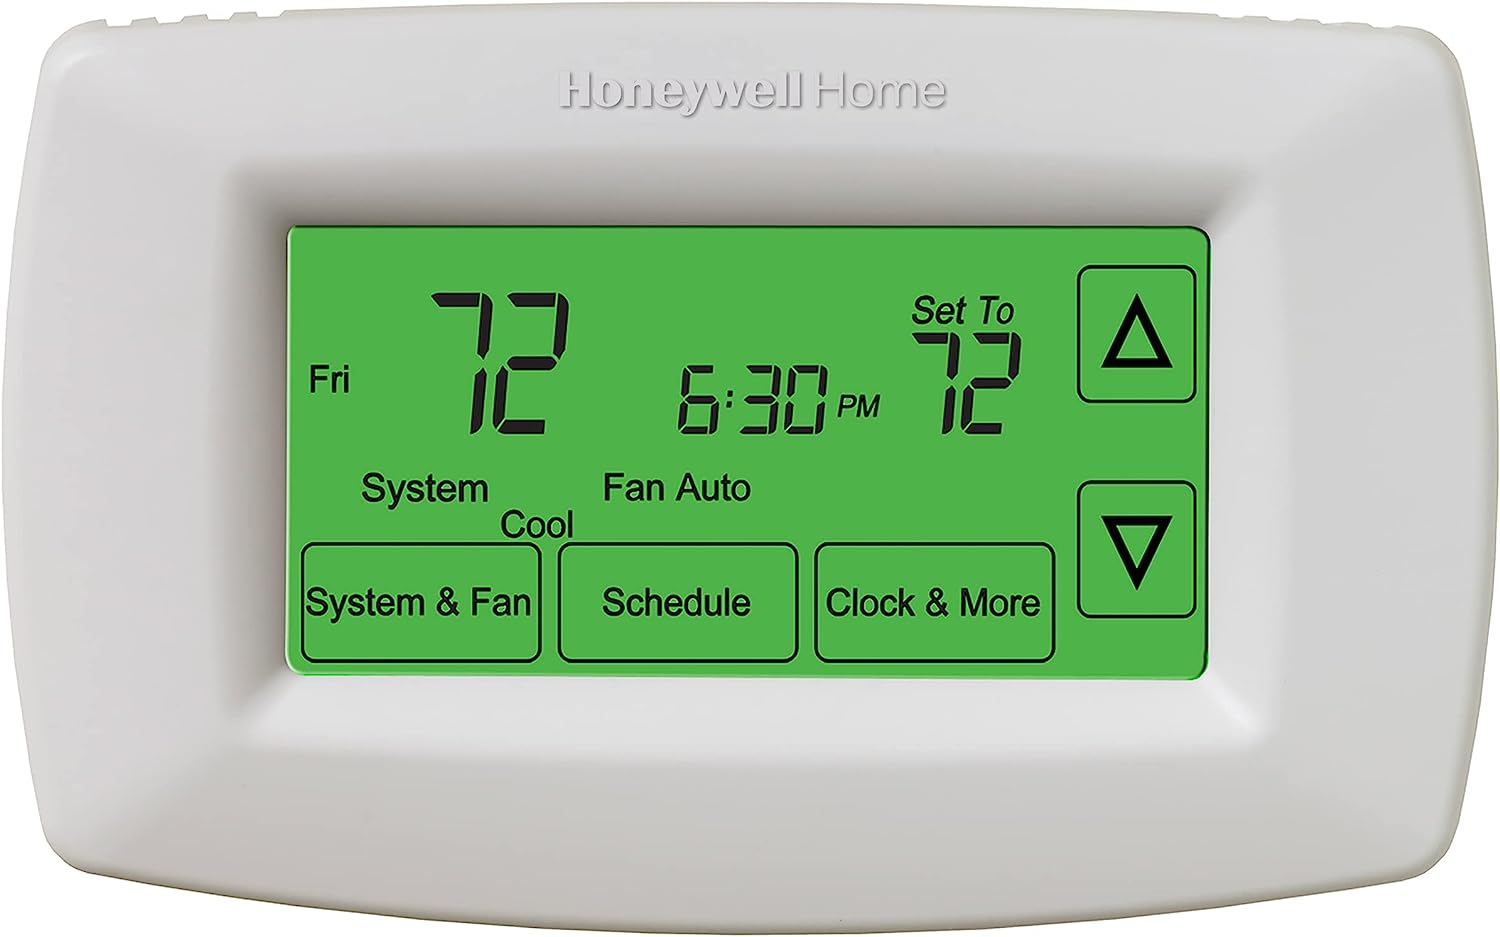 Honeywell Home RTH7600D 7-Day Programmable Touchscreen [...]